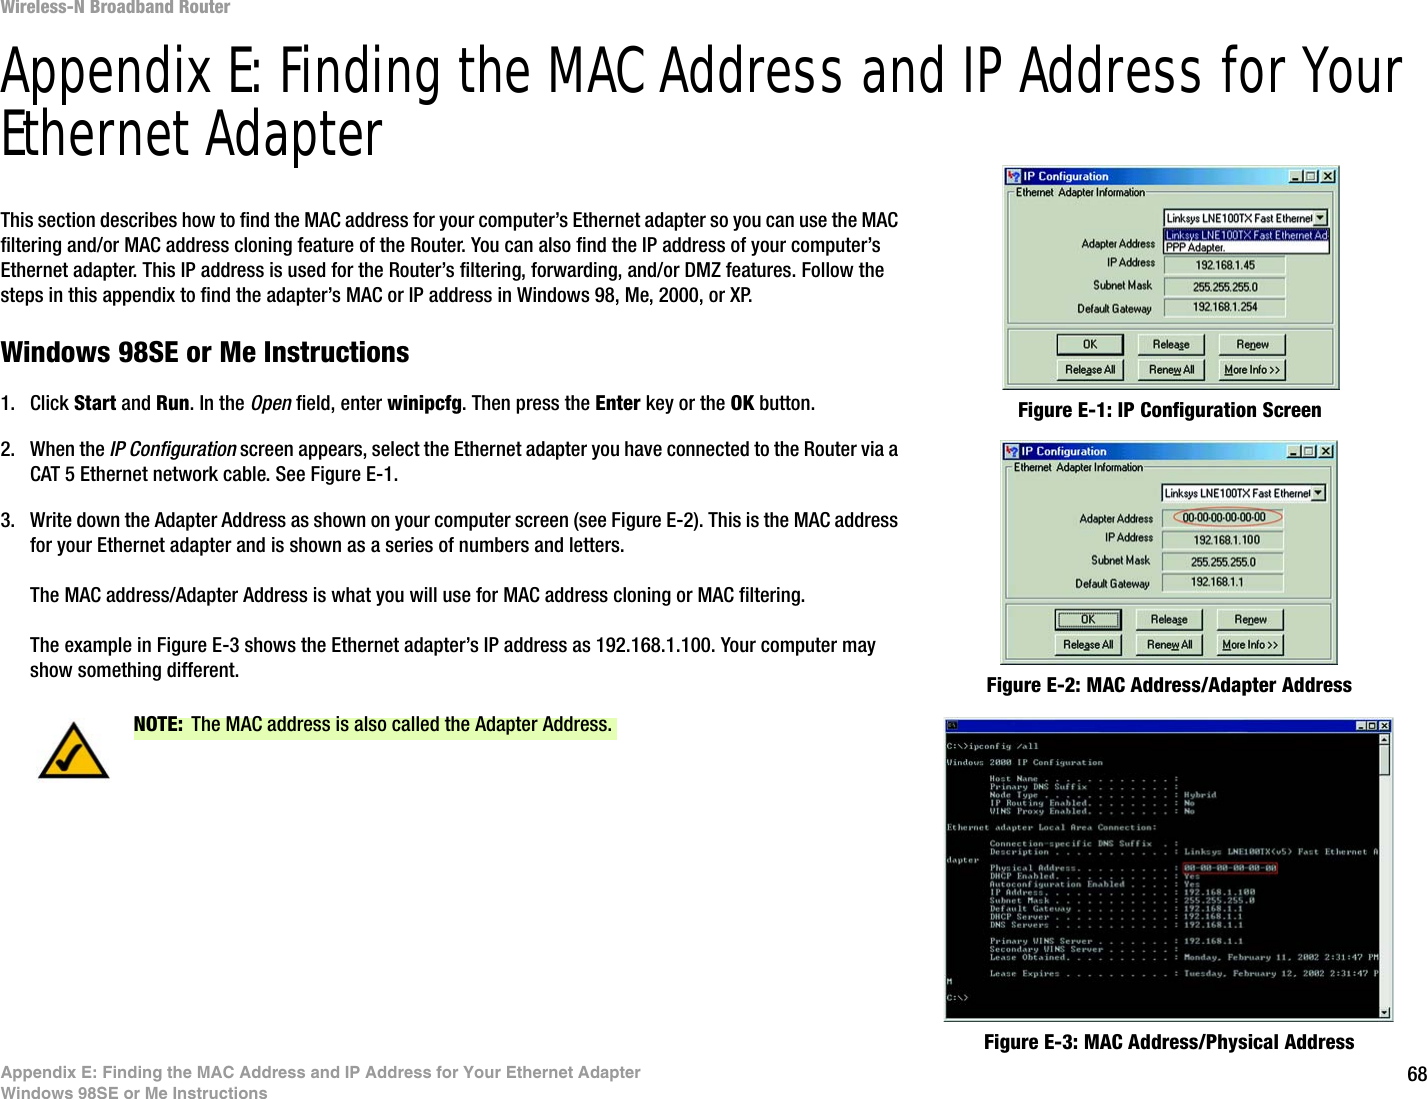 68Appendix E: Finding the MAC Address and IP Address for Your Ethernet AdapterWindows 98SE or Me InstructionsWireless-N Broadband RouterAppendix E: Finding the MAC Address and IP Address for Your Ethernet AdapterThis section describes how to find the MAC address for your computer’s Ethernet adapter so you can use the MAC filtering and/or MAC address cloning feature of the Router. You can also find the IP address of your computer’s Ethernet adapter. This IP address is used for the Router’s filtering, forwarding, and/or DMZ features. Follow the steps in this appendix to find the adapter’s MAC or IP address in Windows 98, Me, 2000, or XP.Windows 98SE or Me Instructions1. Click Start and Run. In the Open field, enter winipcfg. Then press the Enter key or the OK button. 2. When the IP Configuration screen appears, select the Ethernet adapter you have connected to the Router via a CAT 5 Ethernet network cable. See Figure E-1.3. Write down the Adapter Address as shown on your computer screen (see Figure E-2). This is the MAC address for your Ethernet adapter and is shown as a series of numbers and letters.The MAC address/Adapter Address is what you will use for MAC address cloning or MAC filtering.The example in Figure E-3 shows the Ethernet adapter’s IP address as 192.168.1.100. Your computer may show something different. Figure E-2: MAC Address/Adapter AddressFigure E-1: IP Configuration ScreenNOTE: The MAC address is also called the Adapter Address.Figure E-3: MAC Address/Physical Address